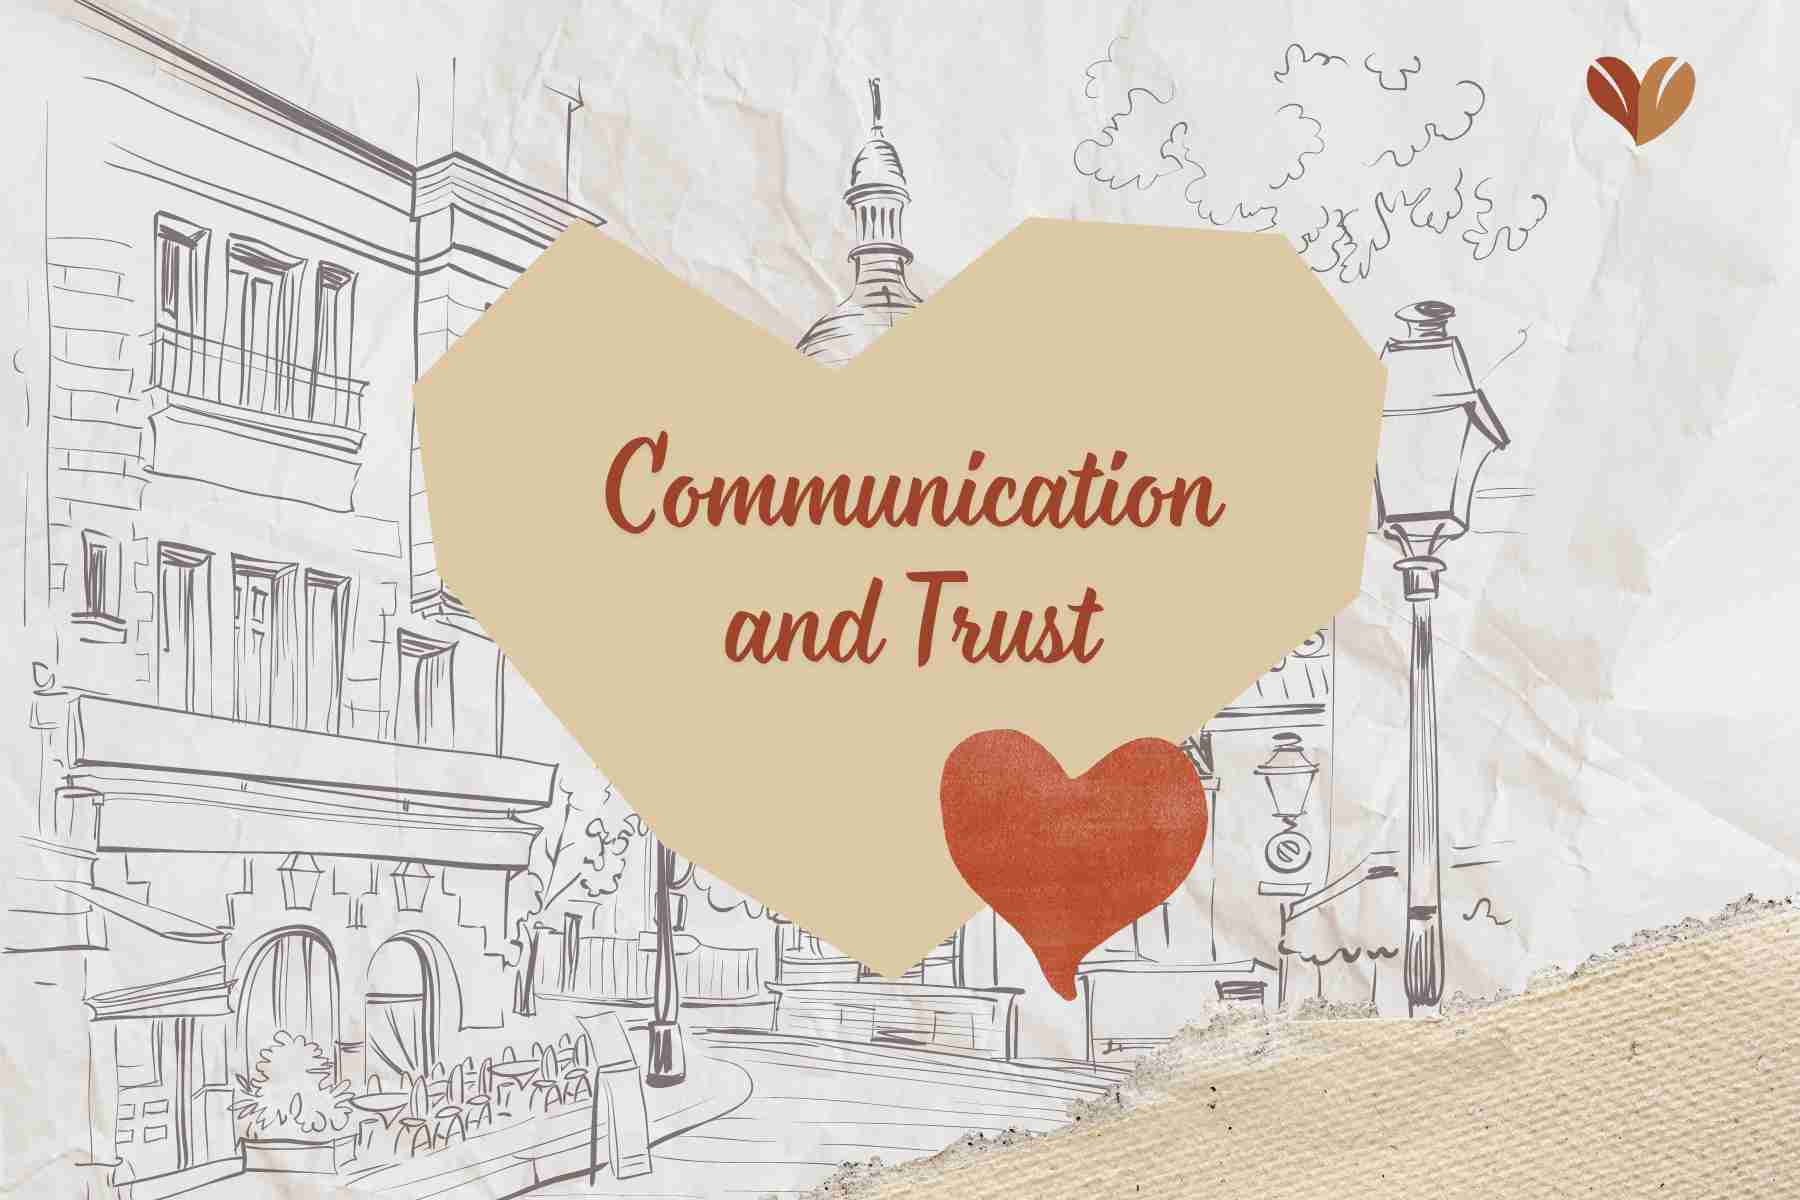 Building trust is crucial when thinking of ideas for long-distance relationships.